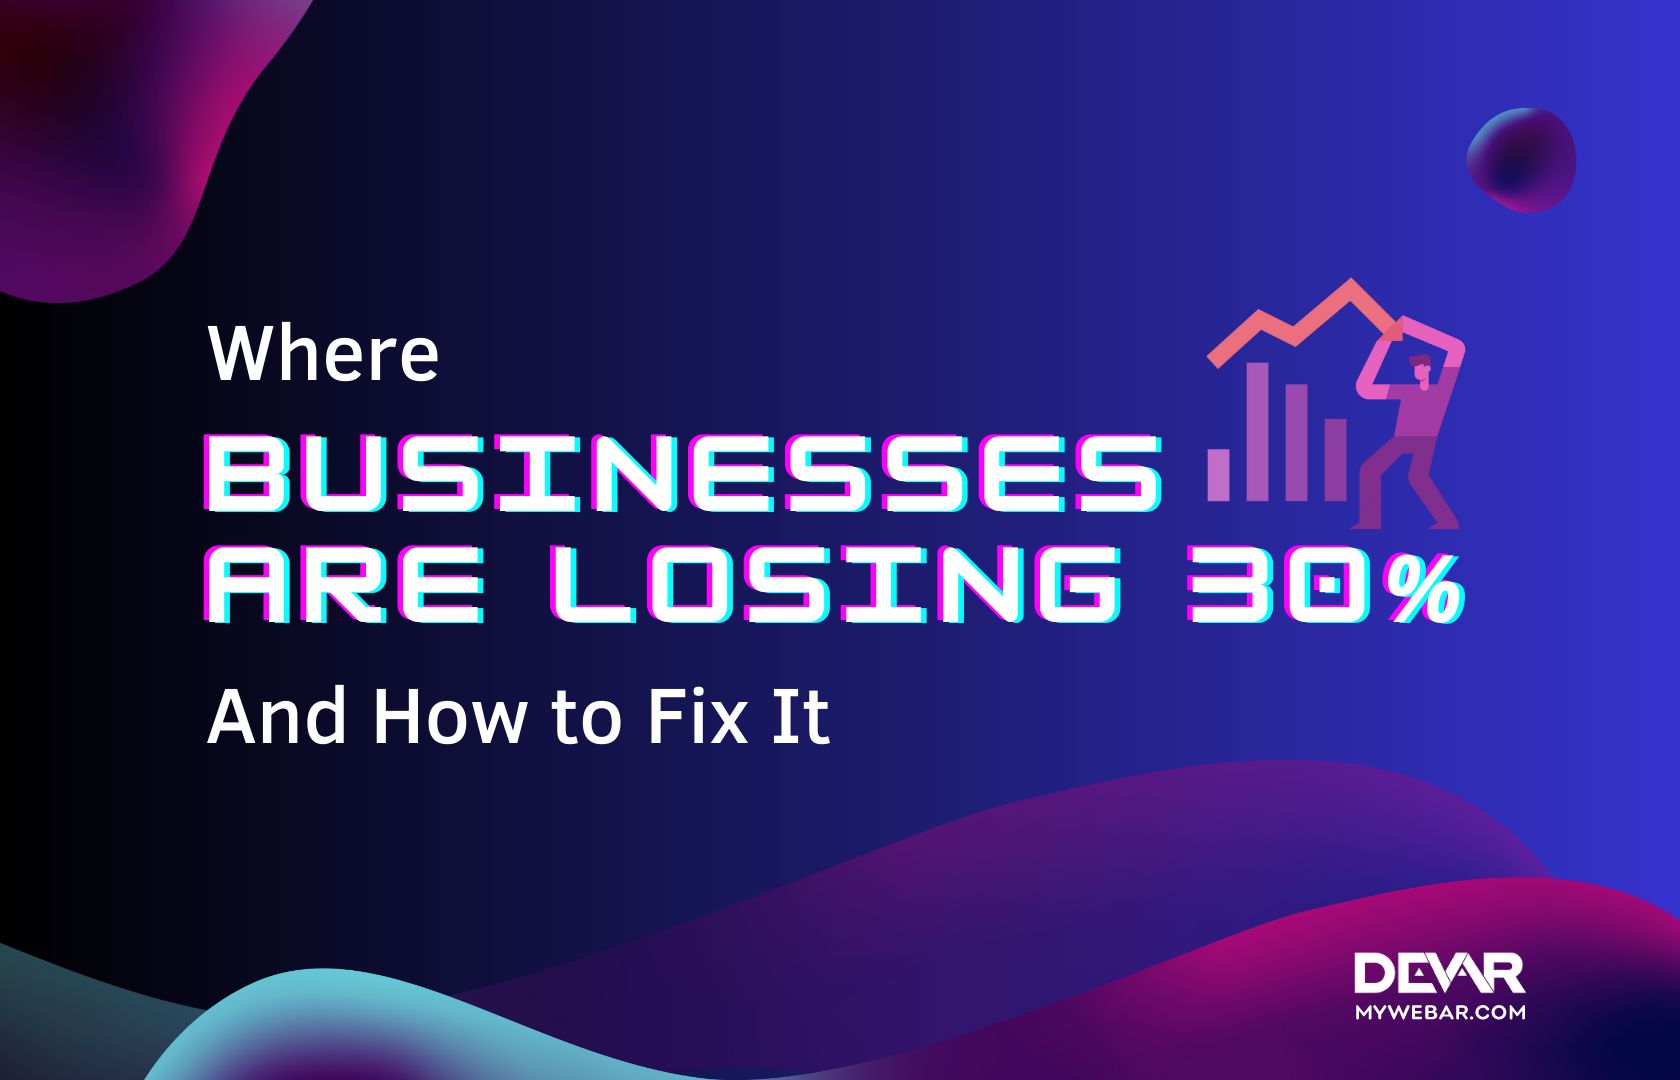 Where Businesses Are Losing 30% and How to Fix It